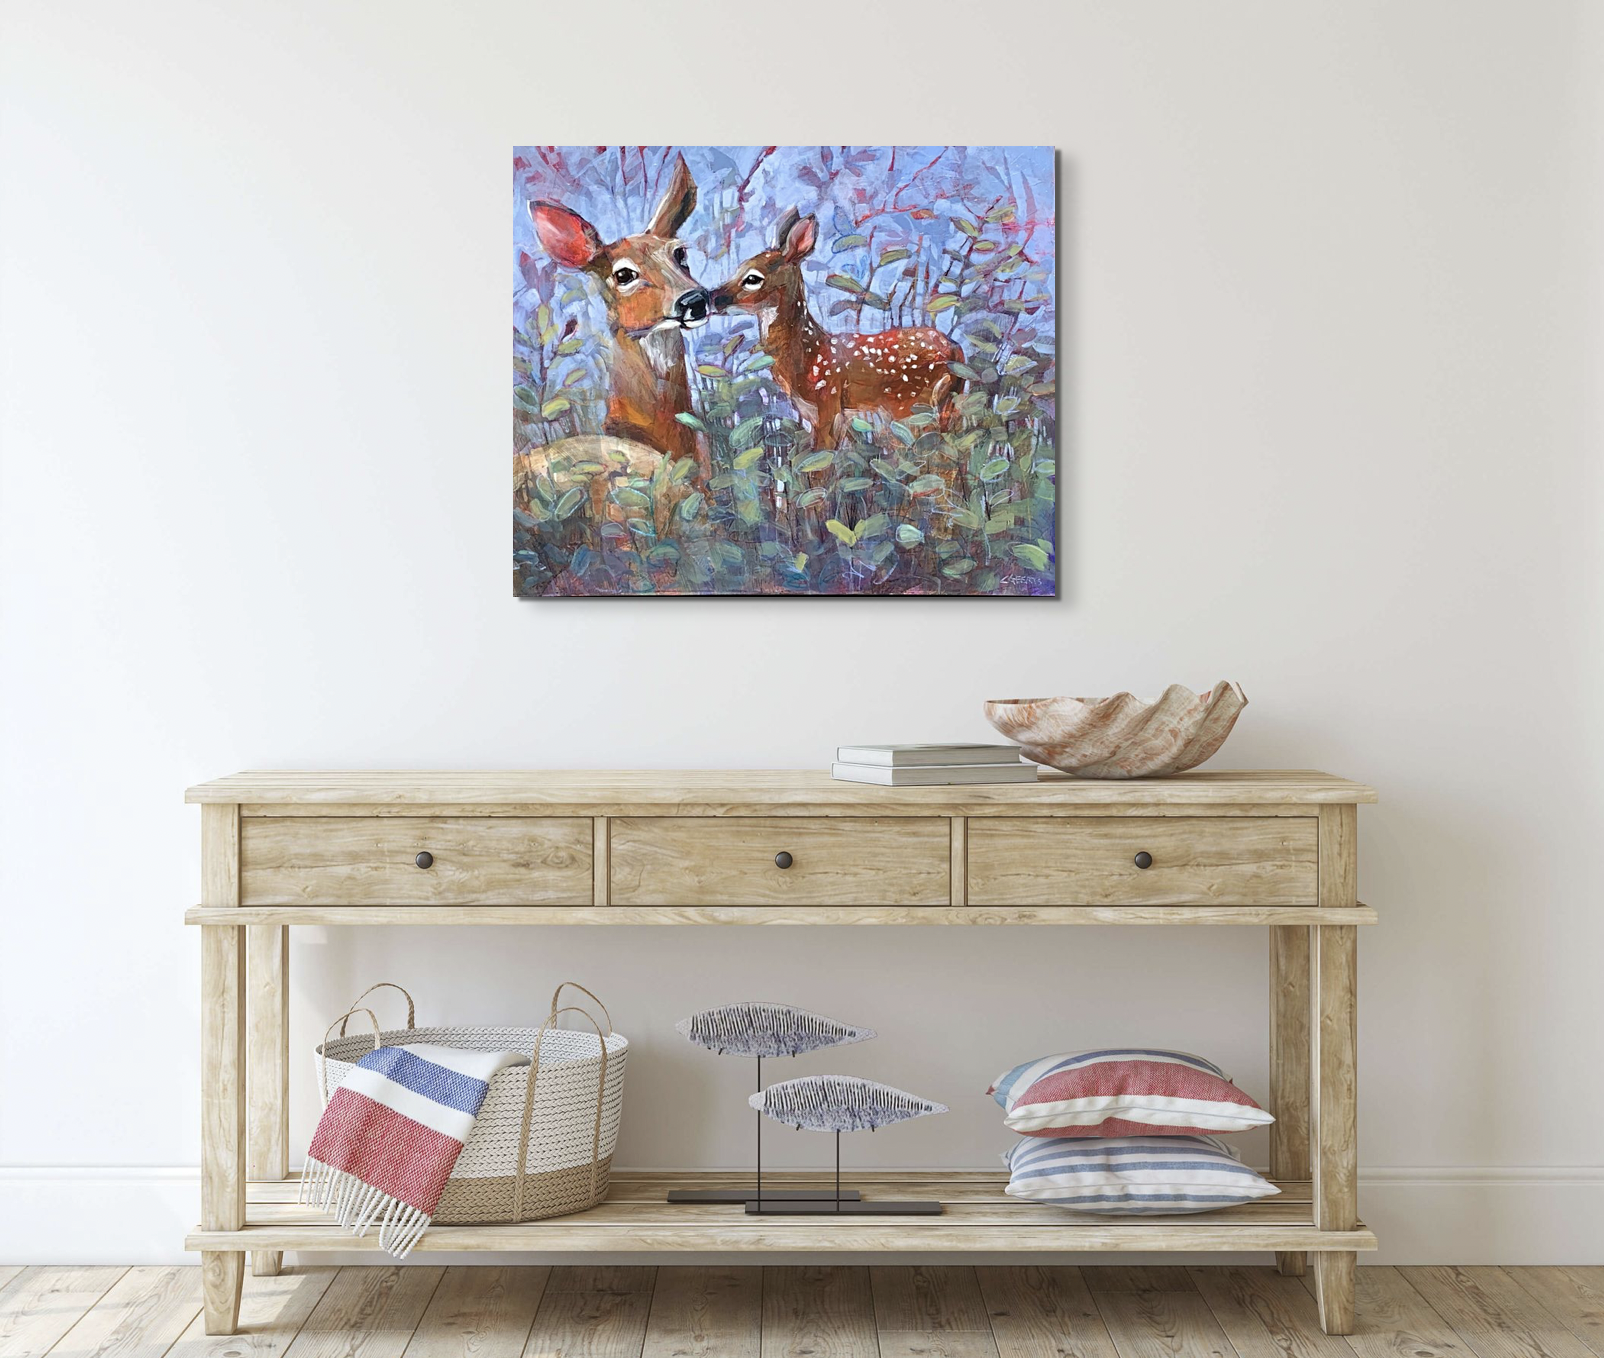 Life is Sweet, acrylic mama deer and fawn painting by Connie Geerts | Effusion Art Gallery + Cast Glass Studio, Invermere BC